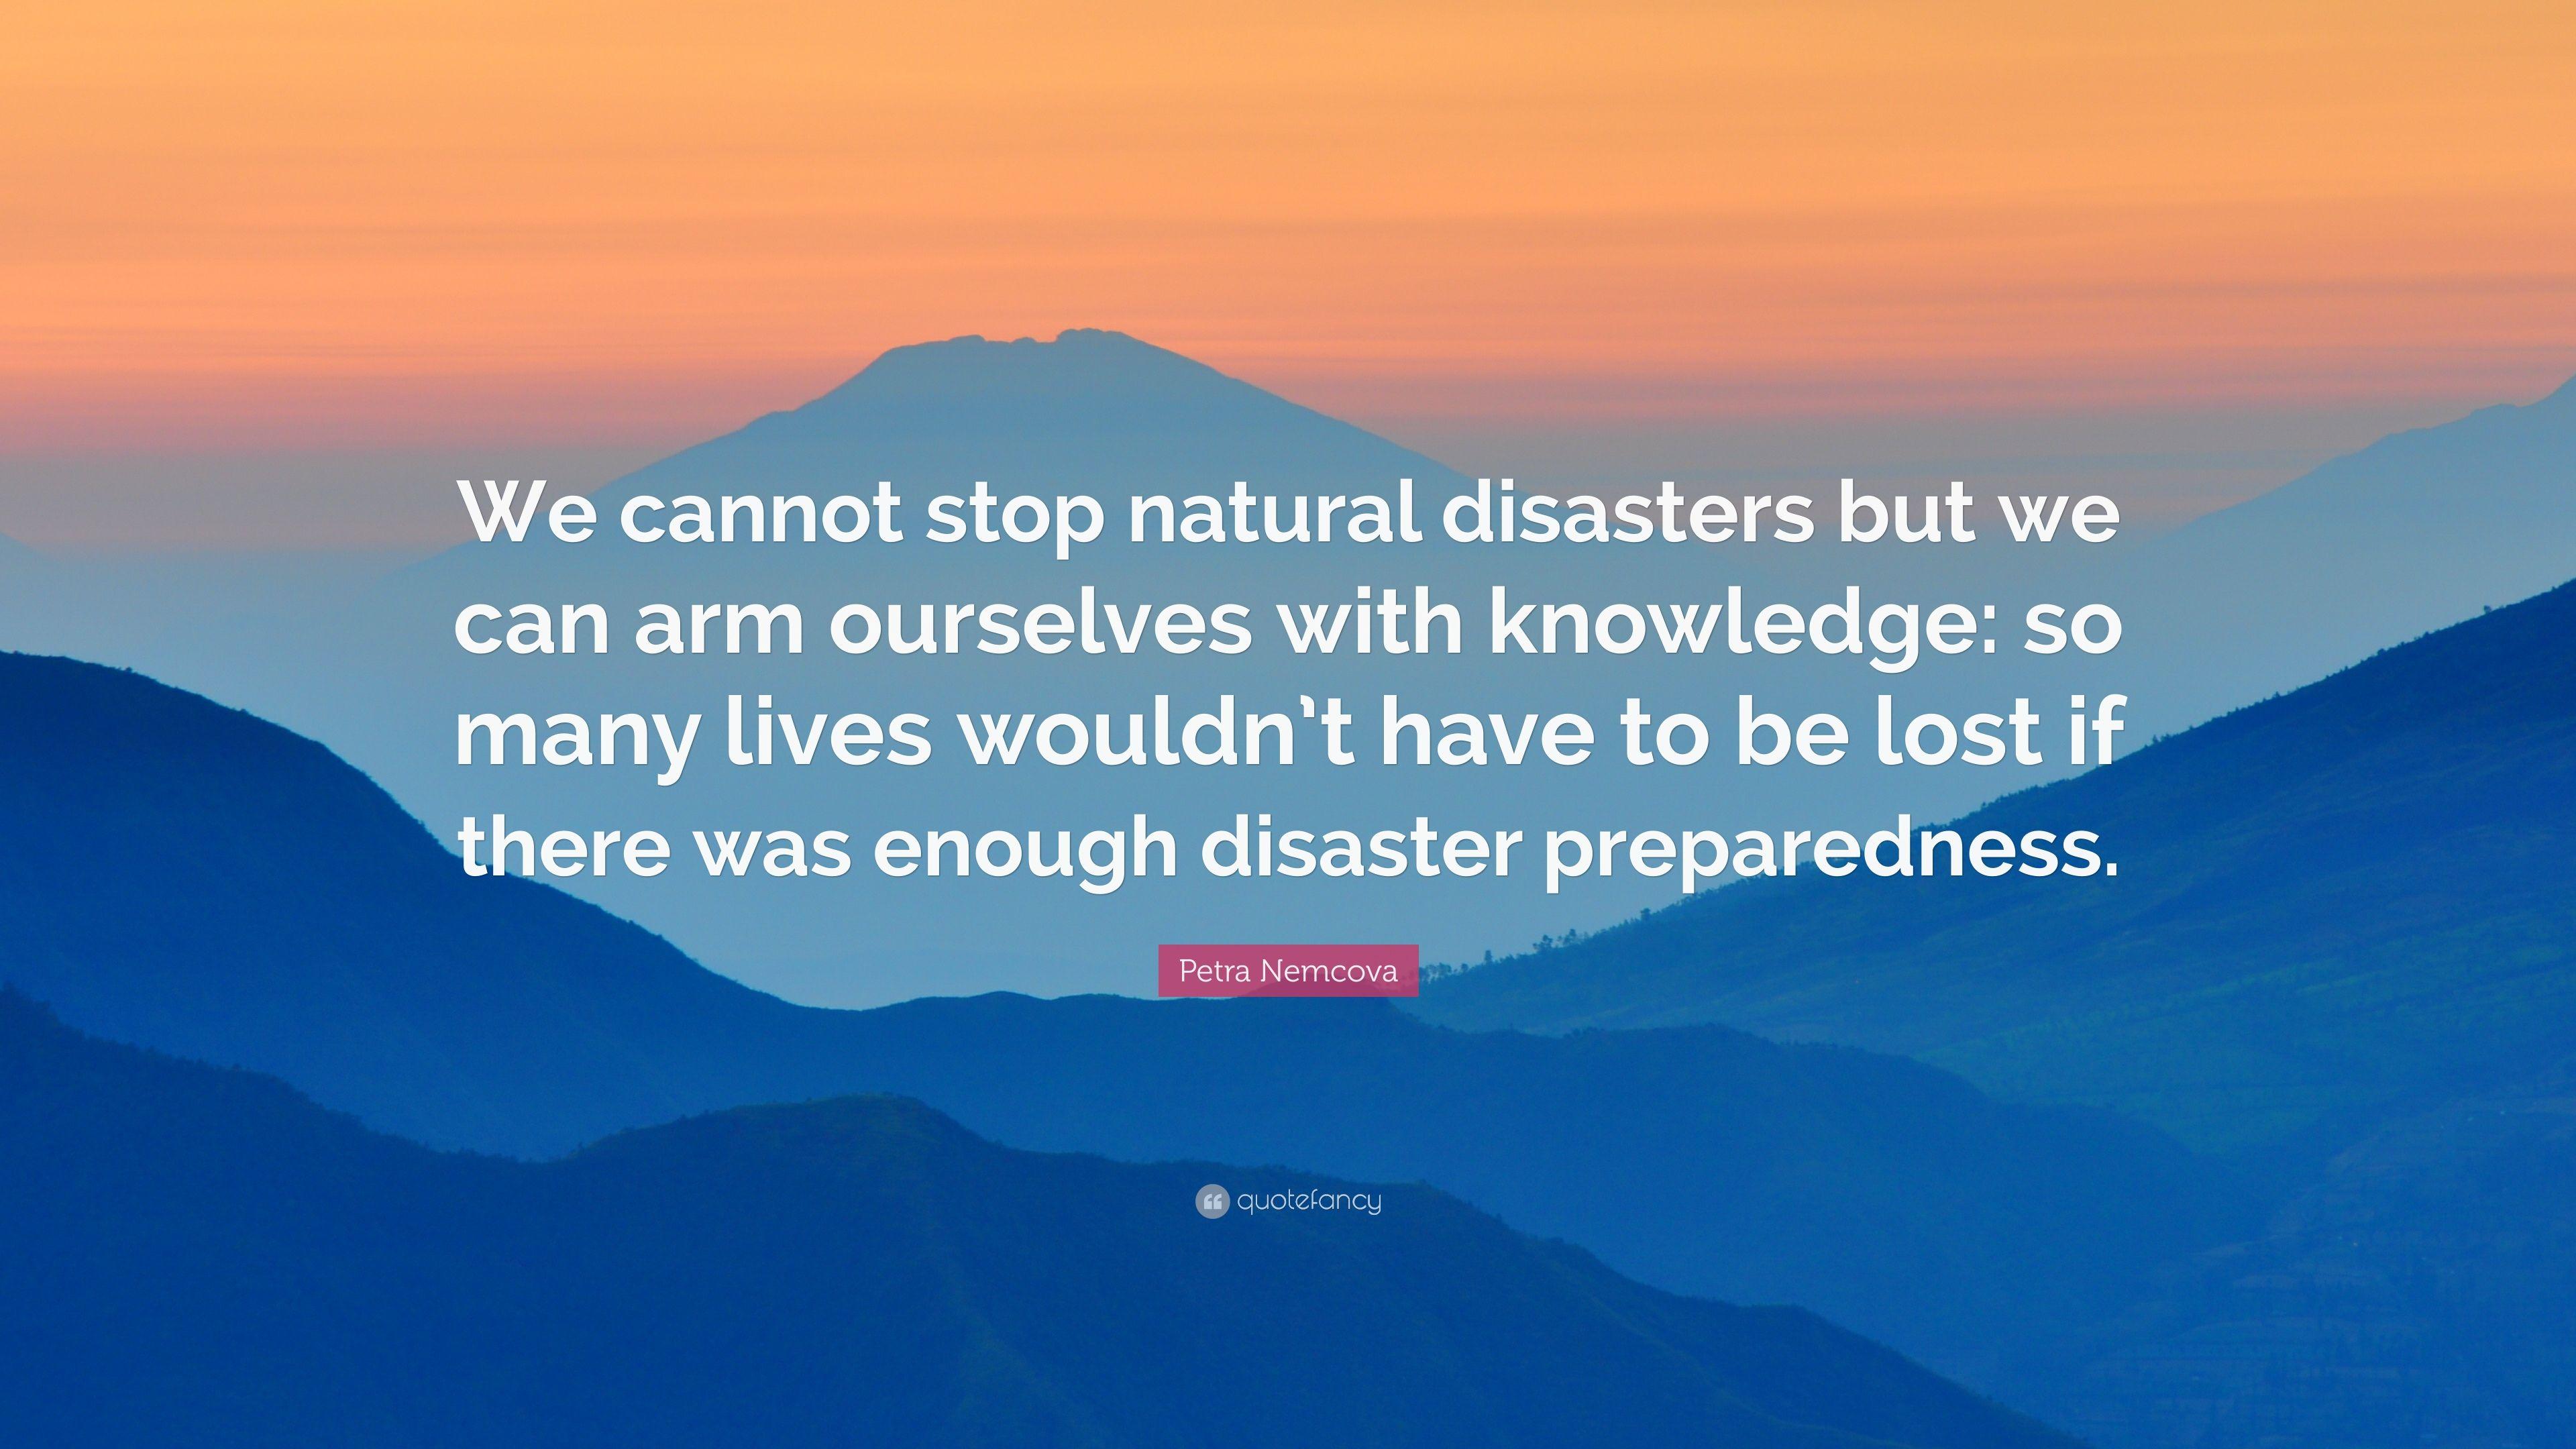 Petra Nemcova Quote: “We cannot stop natural disasters but we can